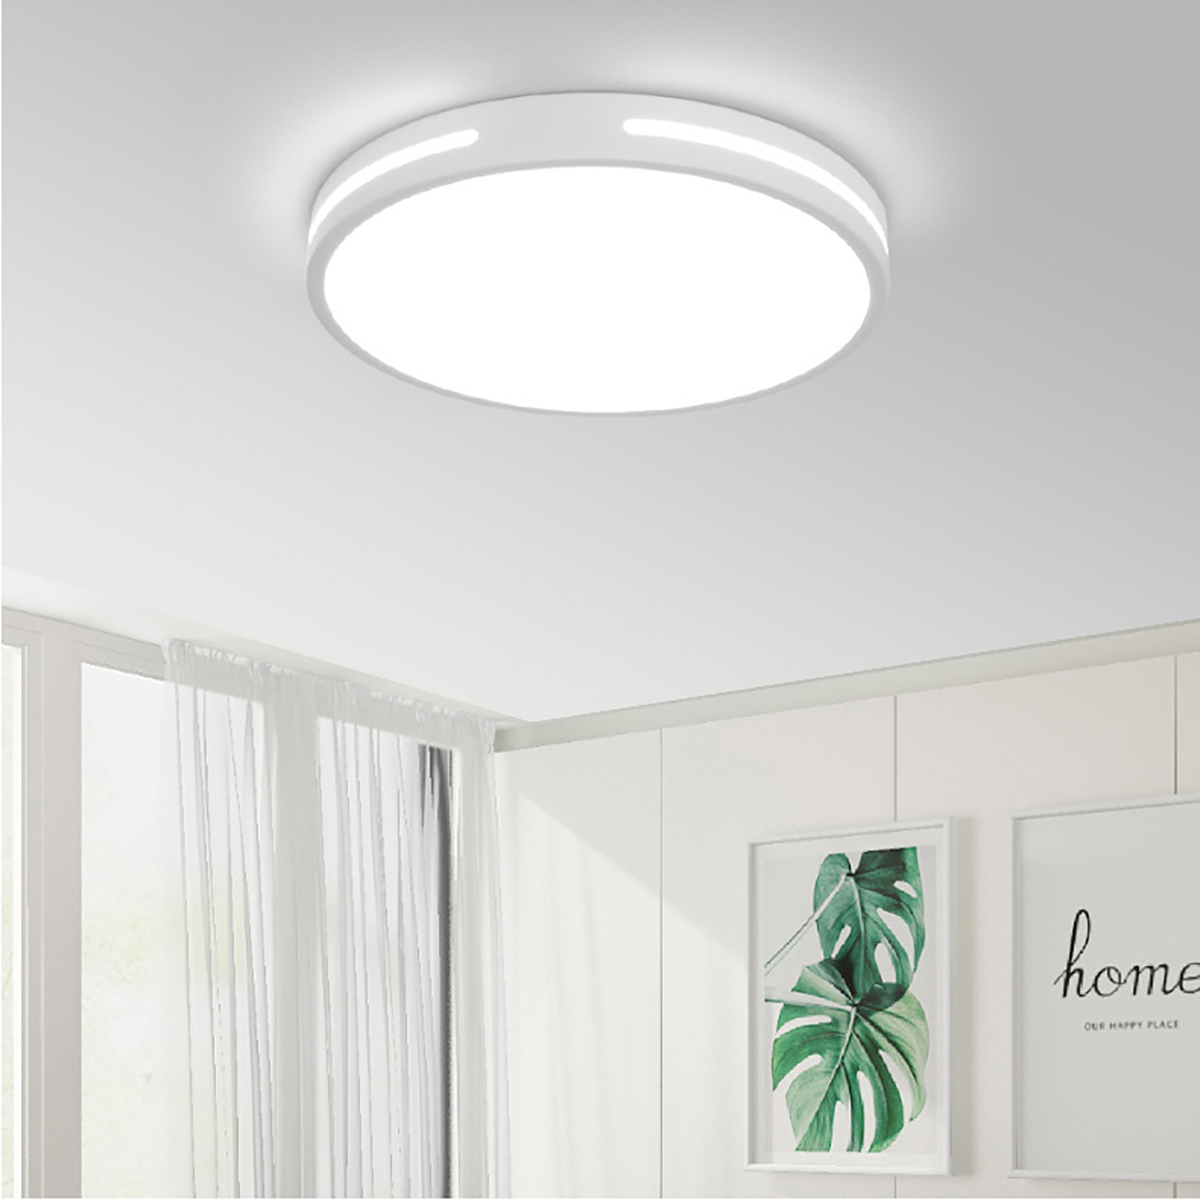 18W24W36W-6000K-White-LED-Ceiling-Light-Non-Dimmable-Indoor-Living-Bedroom-Lamp-for-Home-Decor-1770239-4